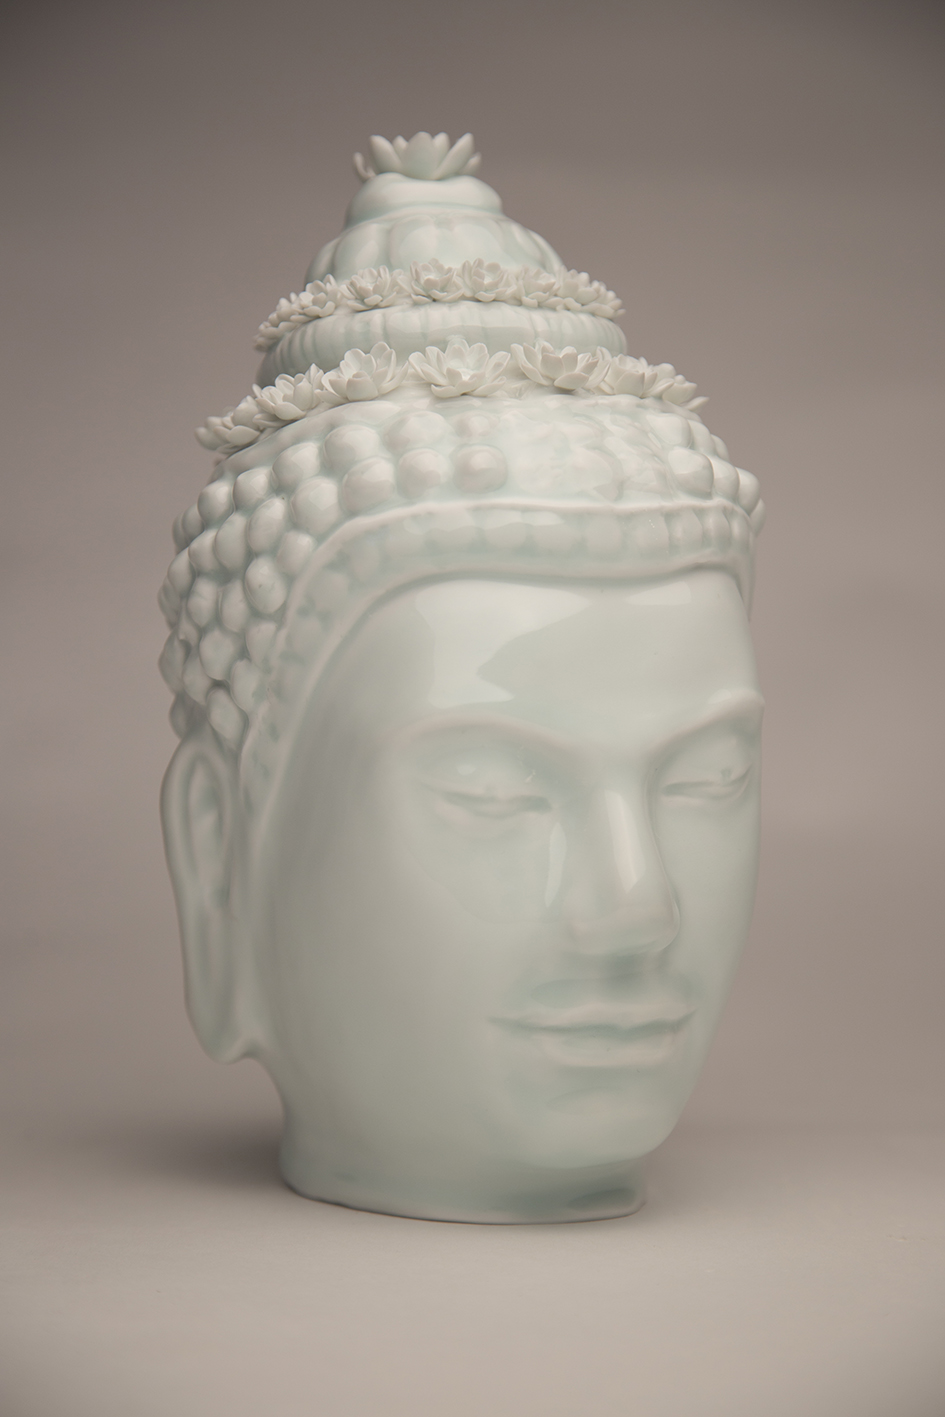 OA 1951.11-12.1 Head of Buddha given by Colonel M. Earle (Jade celadon with lotus flowers)